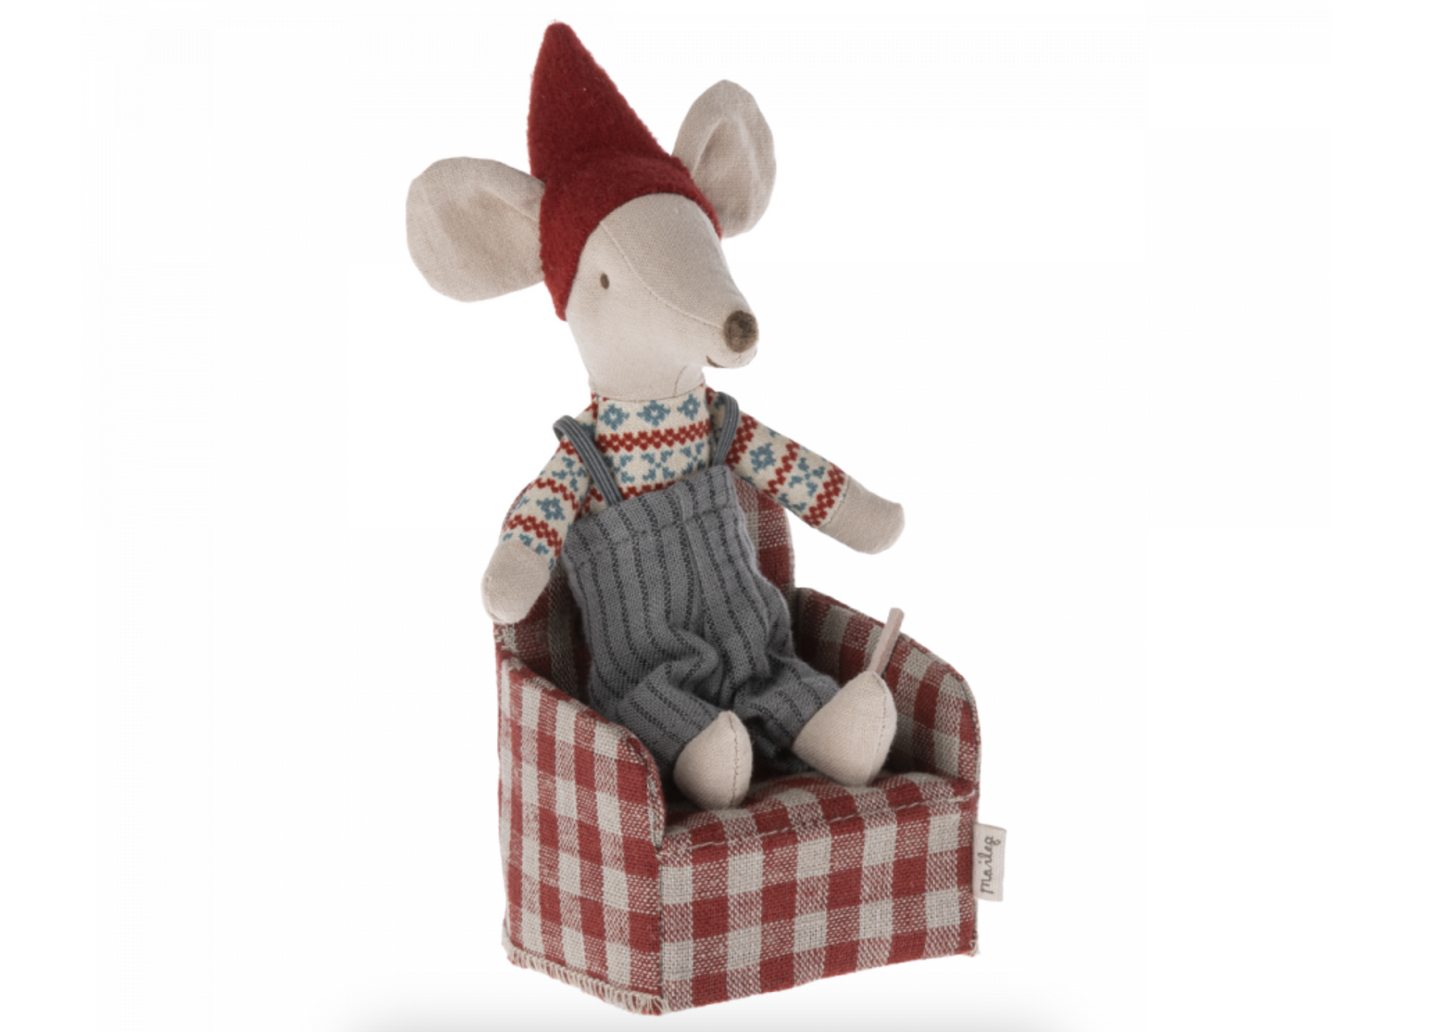 Maileg Chair, Mouse - Red